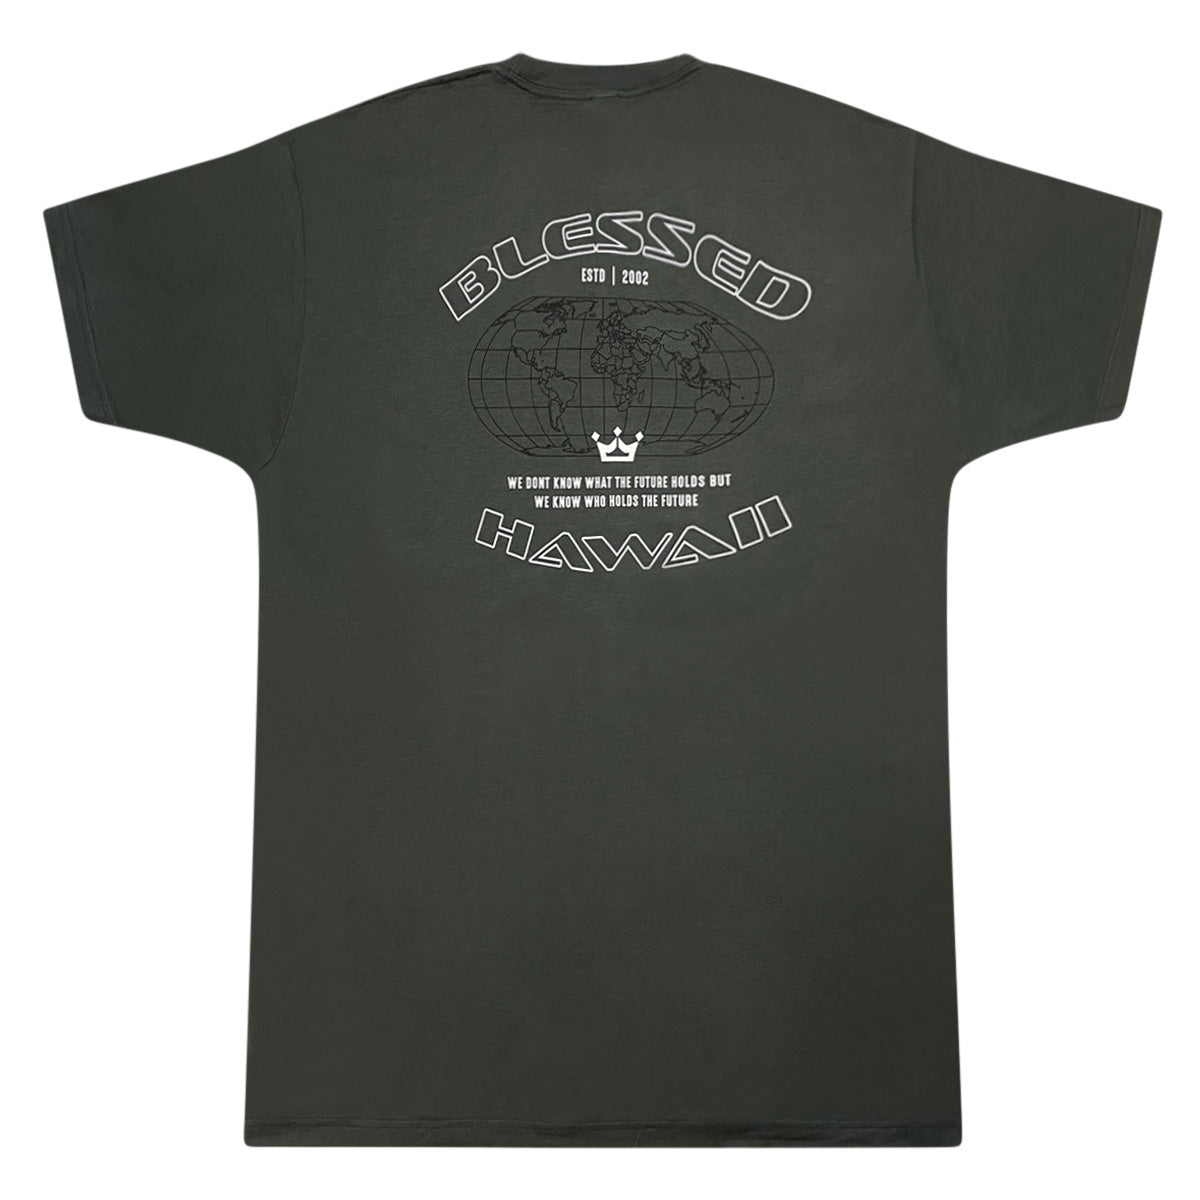 Blessed World SS Tee